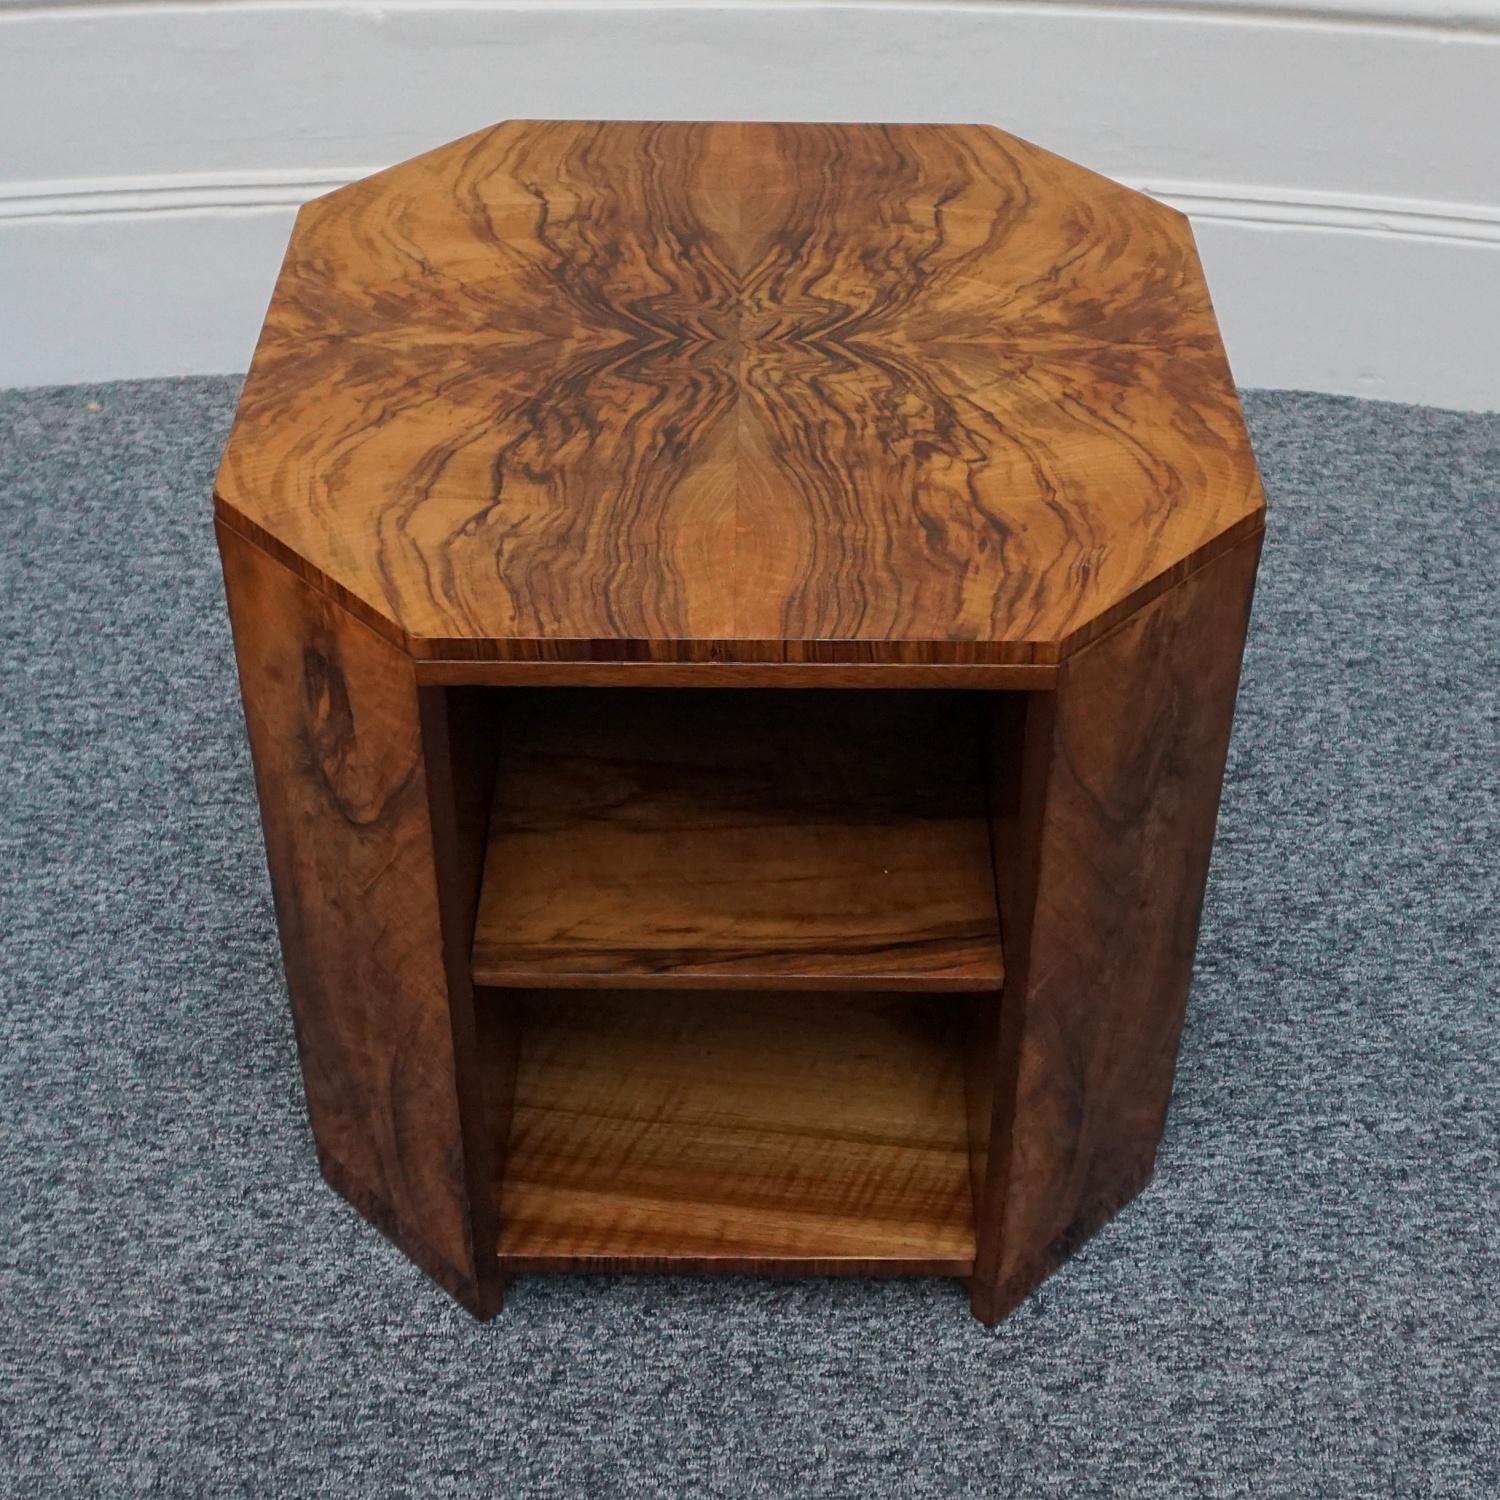 Mid-20th Century Art Deco Burr Walnut Side Table by Heal's of London Circa 1935